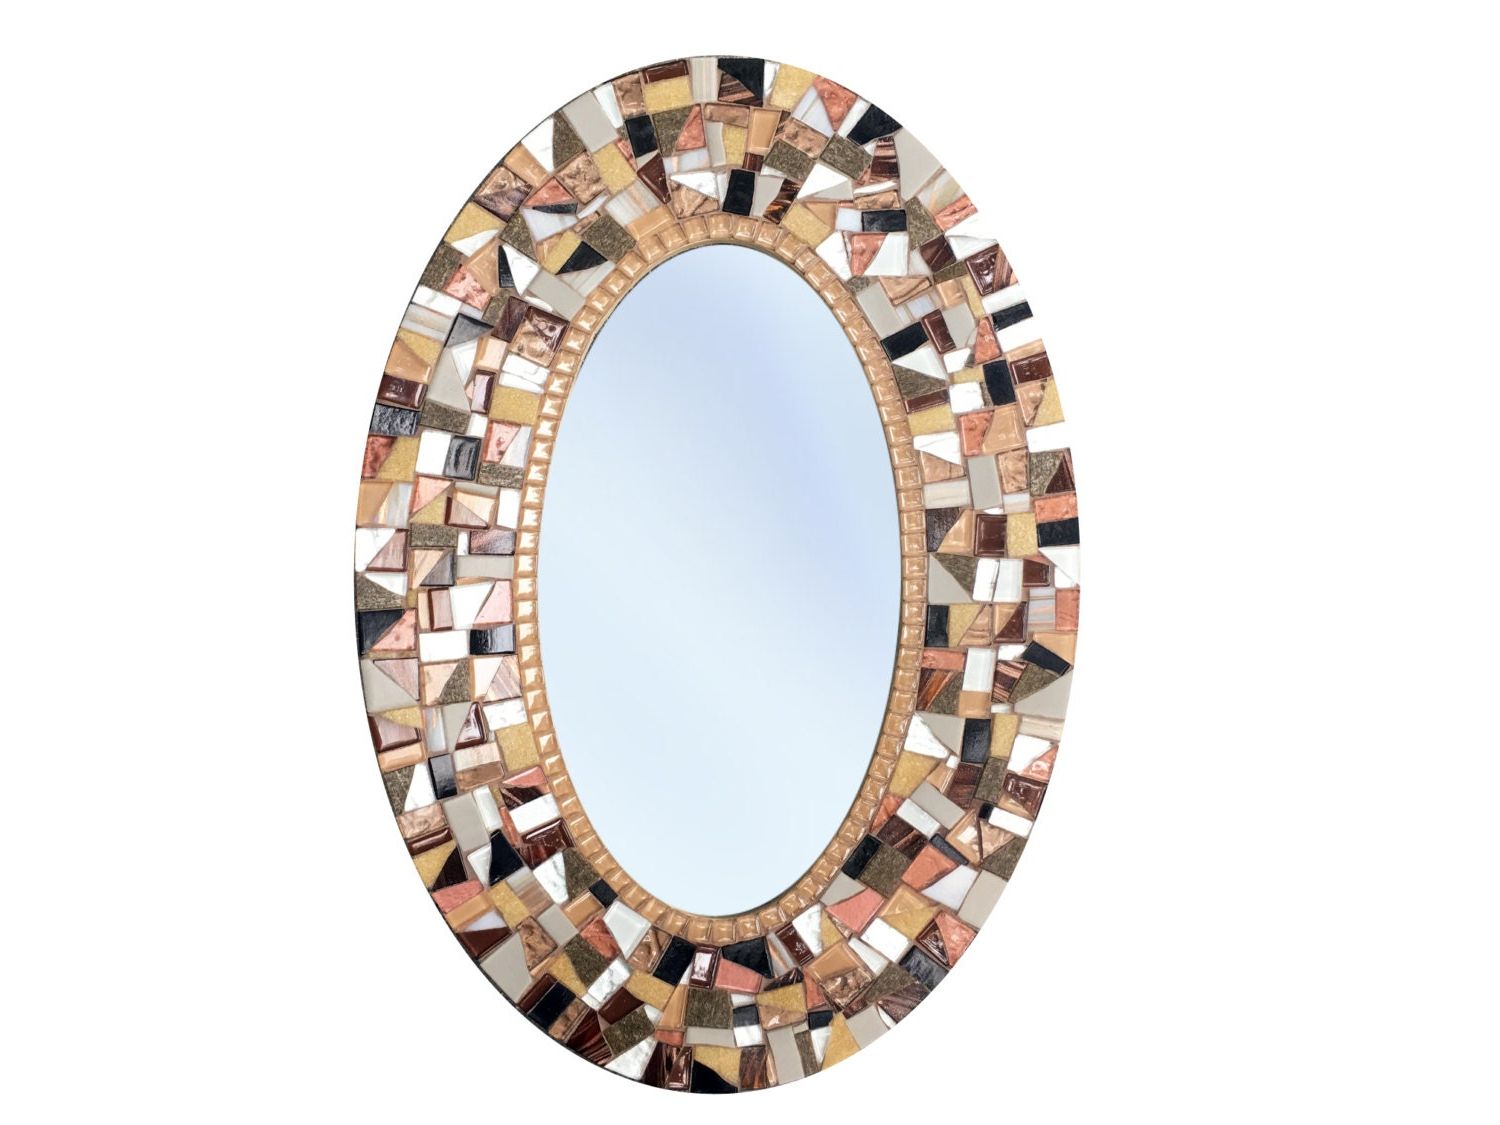 Mosaic Oval Wall Mirrors For Well Known Brown Oval Wall Mirror // Mosaic Mirror // Wall Decor (View 3 of 15)